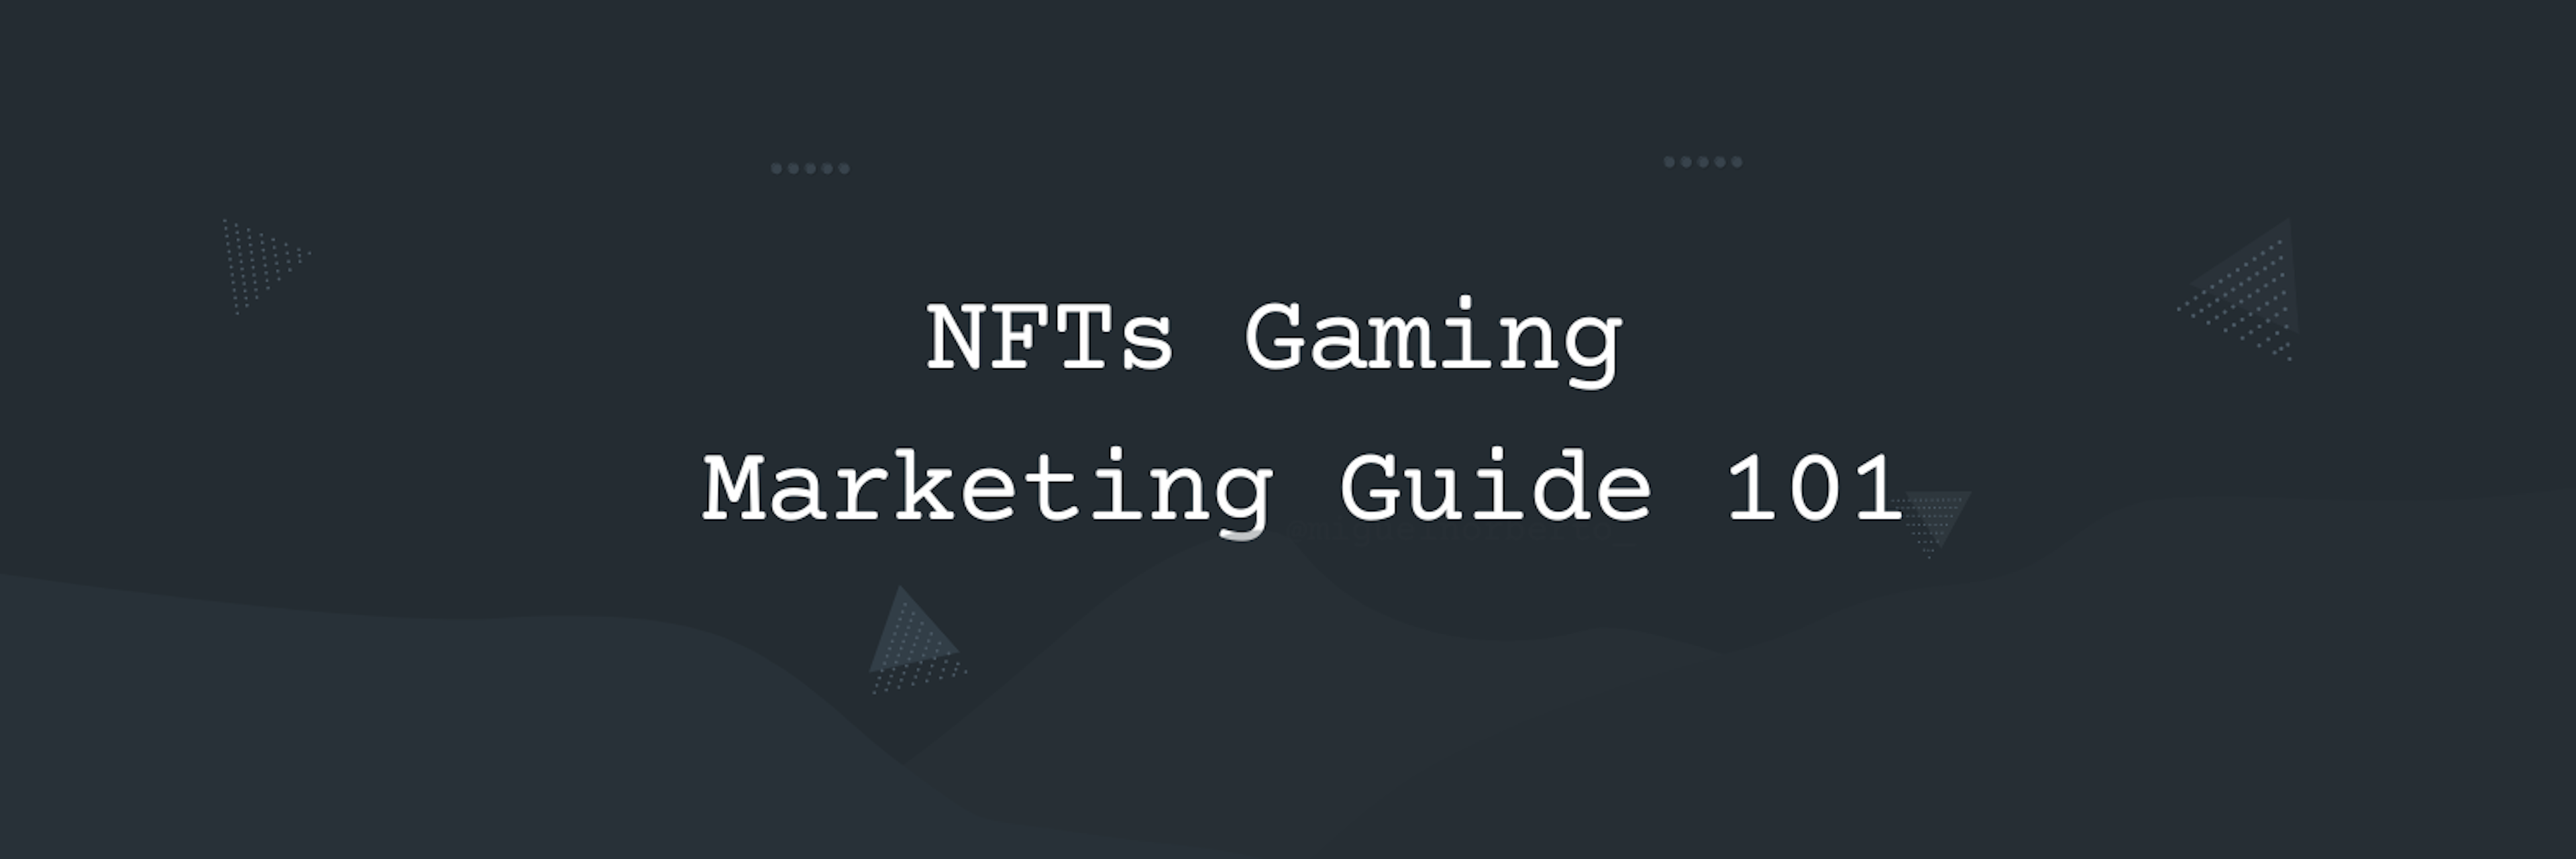 NFTs Gaming Marketing Guide 101